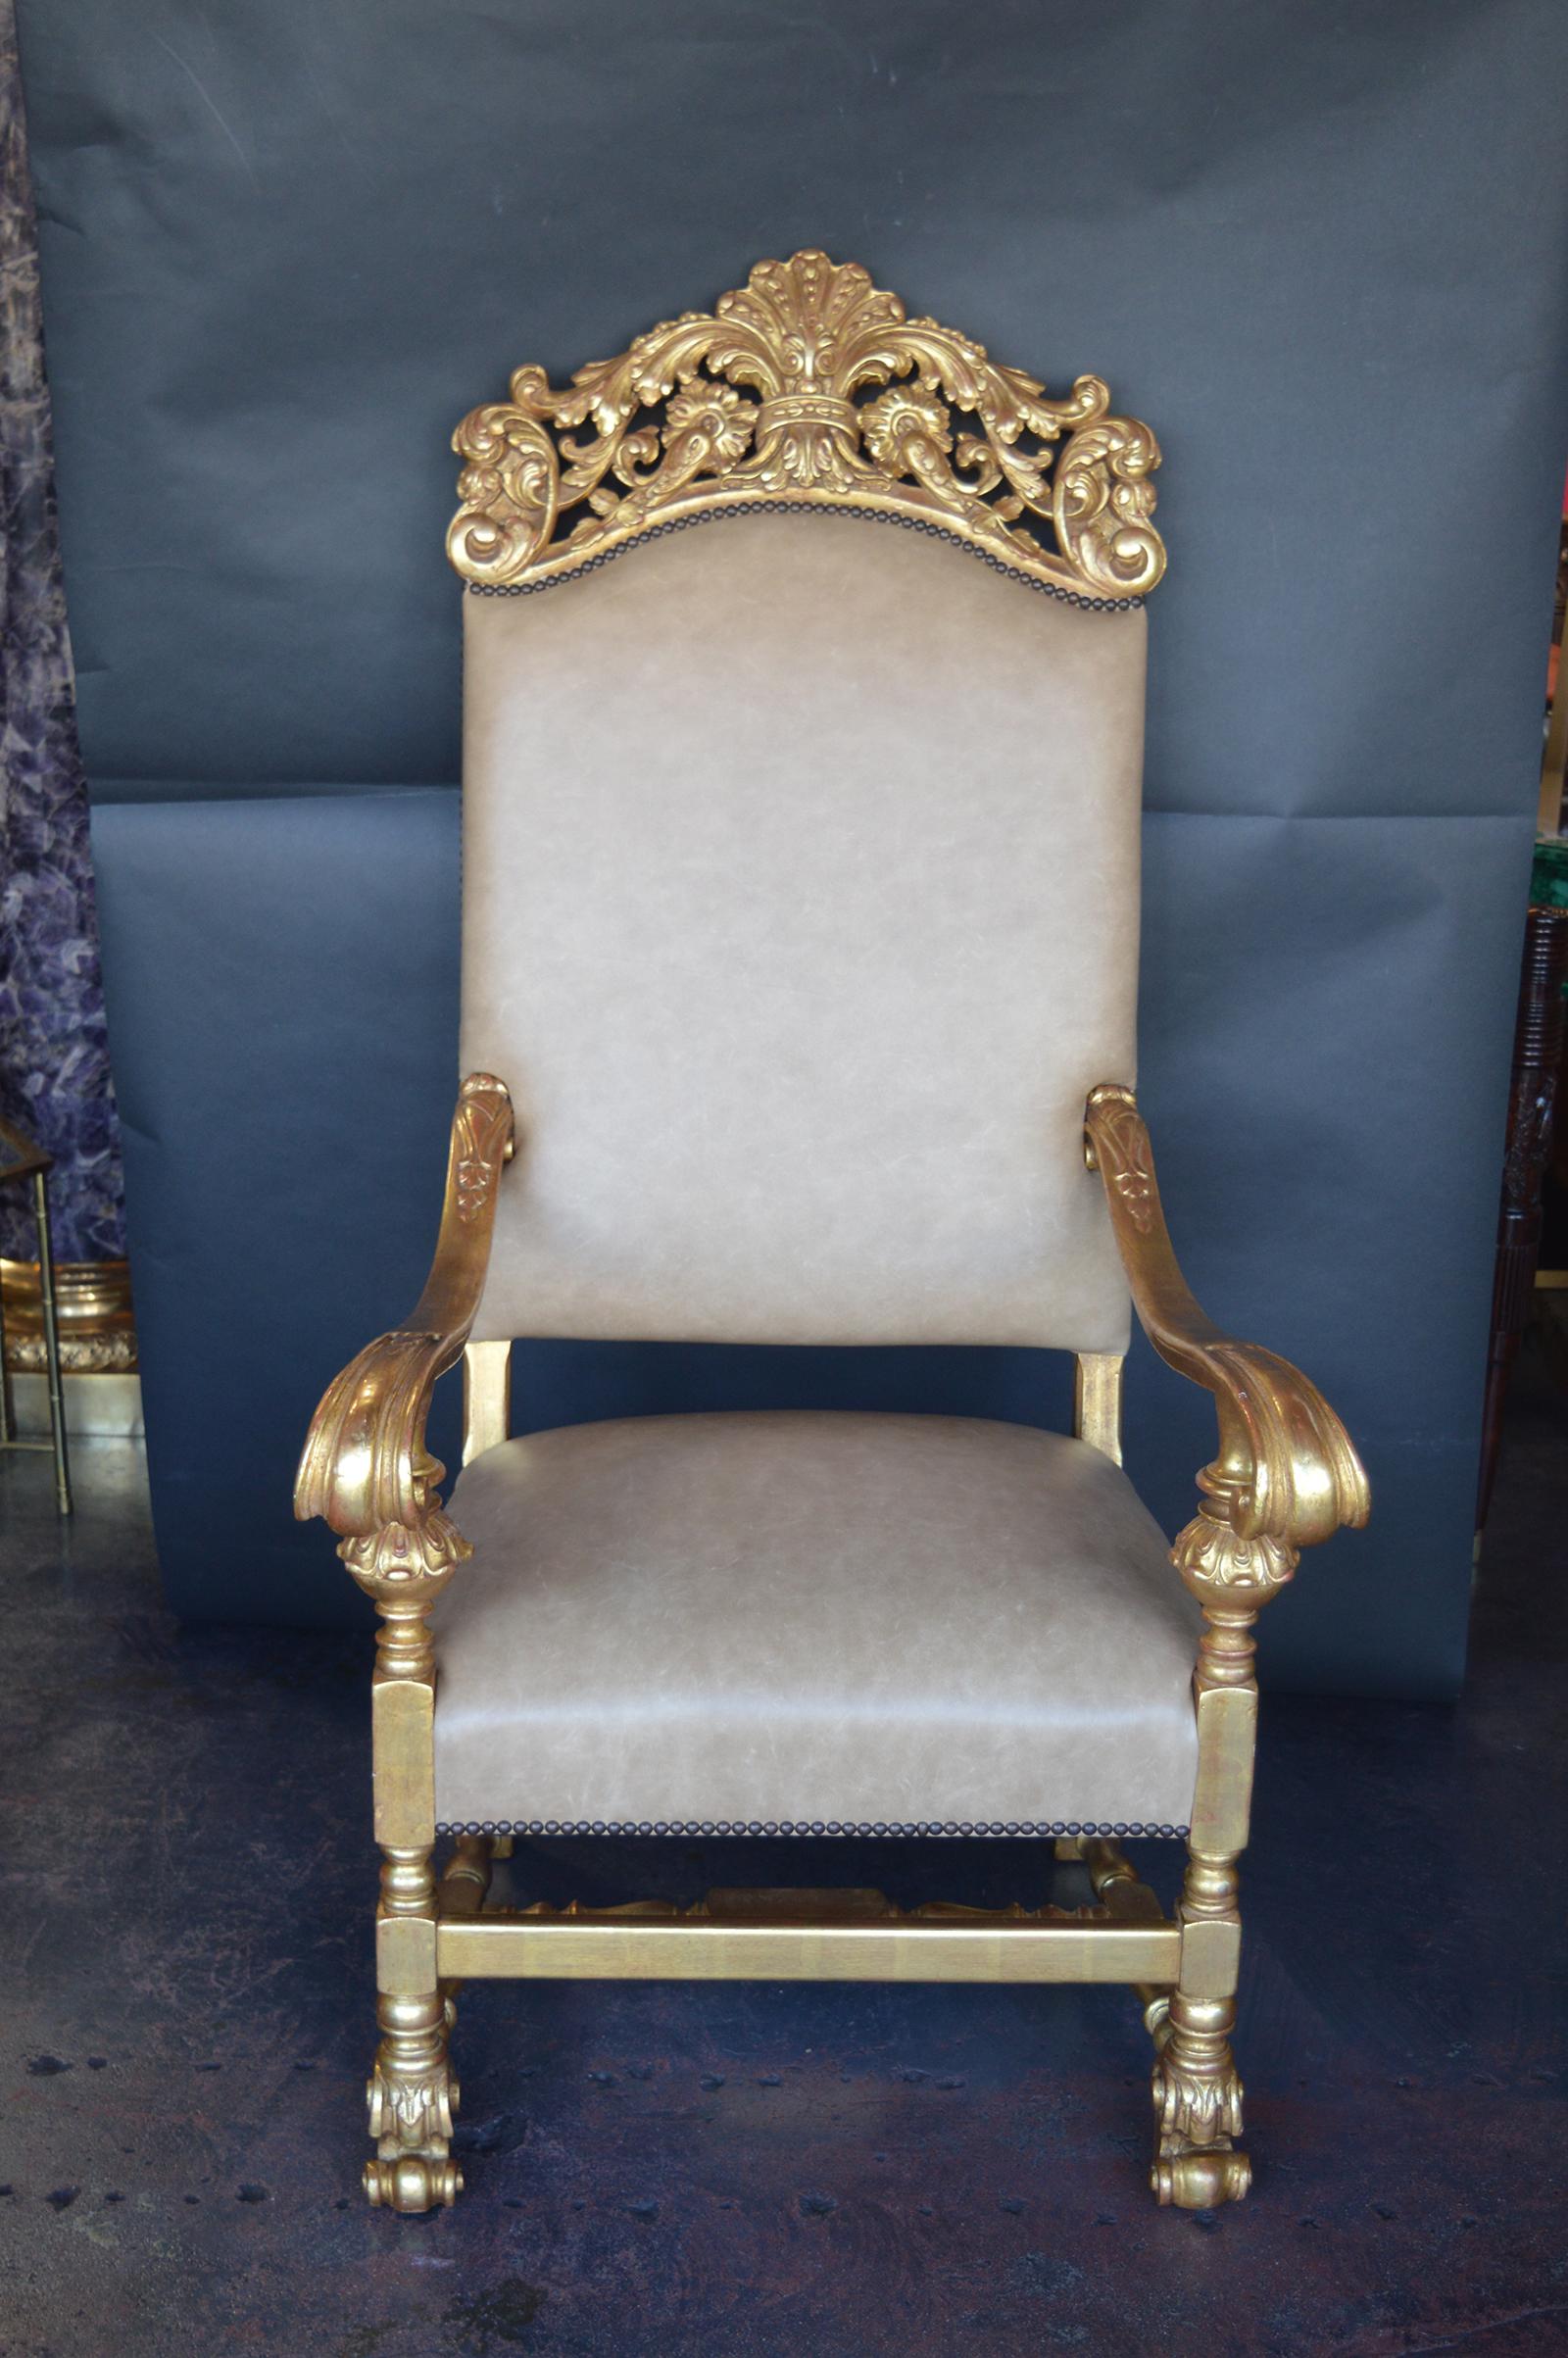 19th century Italian throne chair. Water guild with 22-karat gold. New leather.